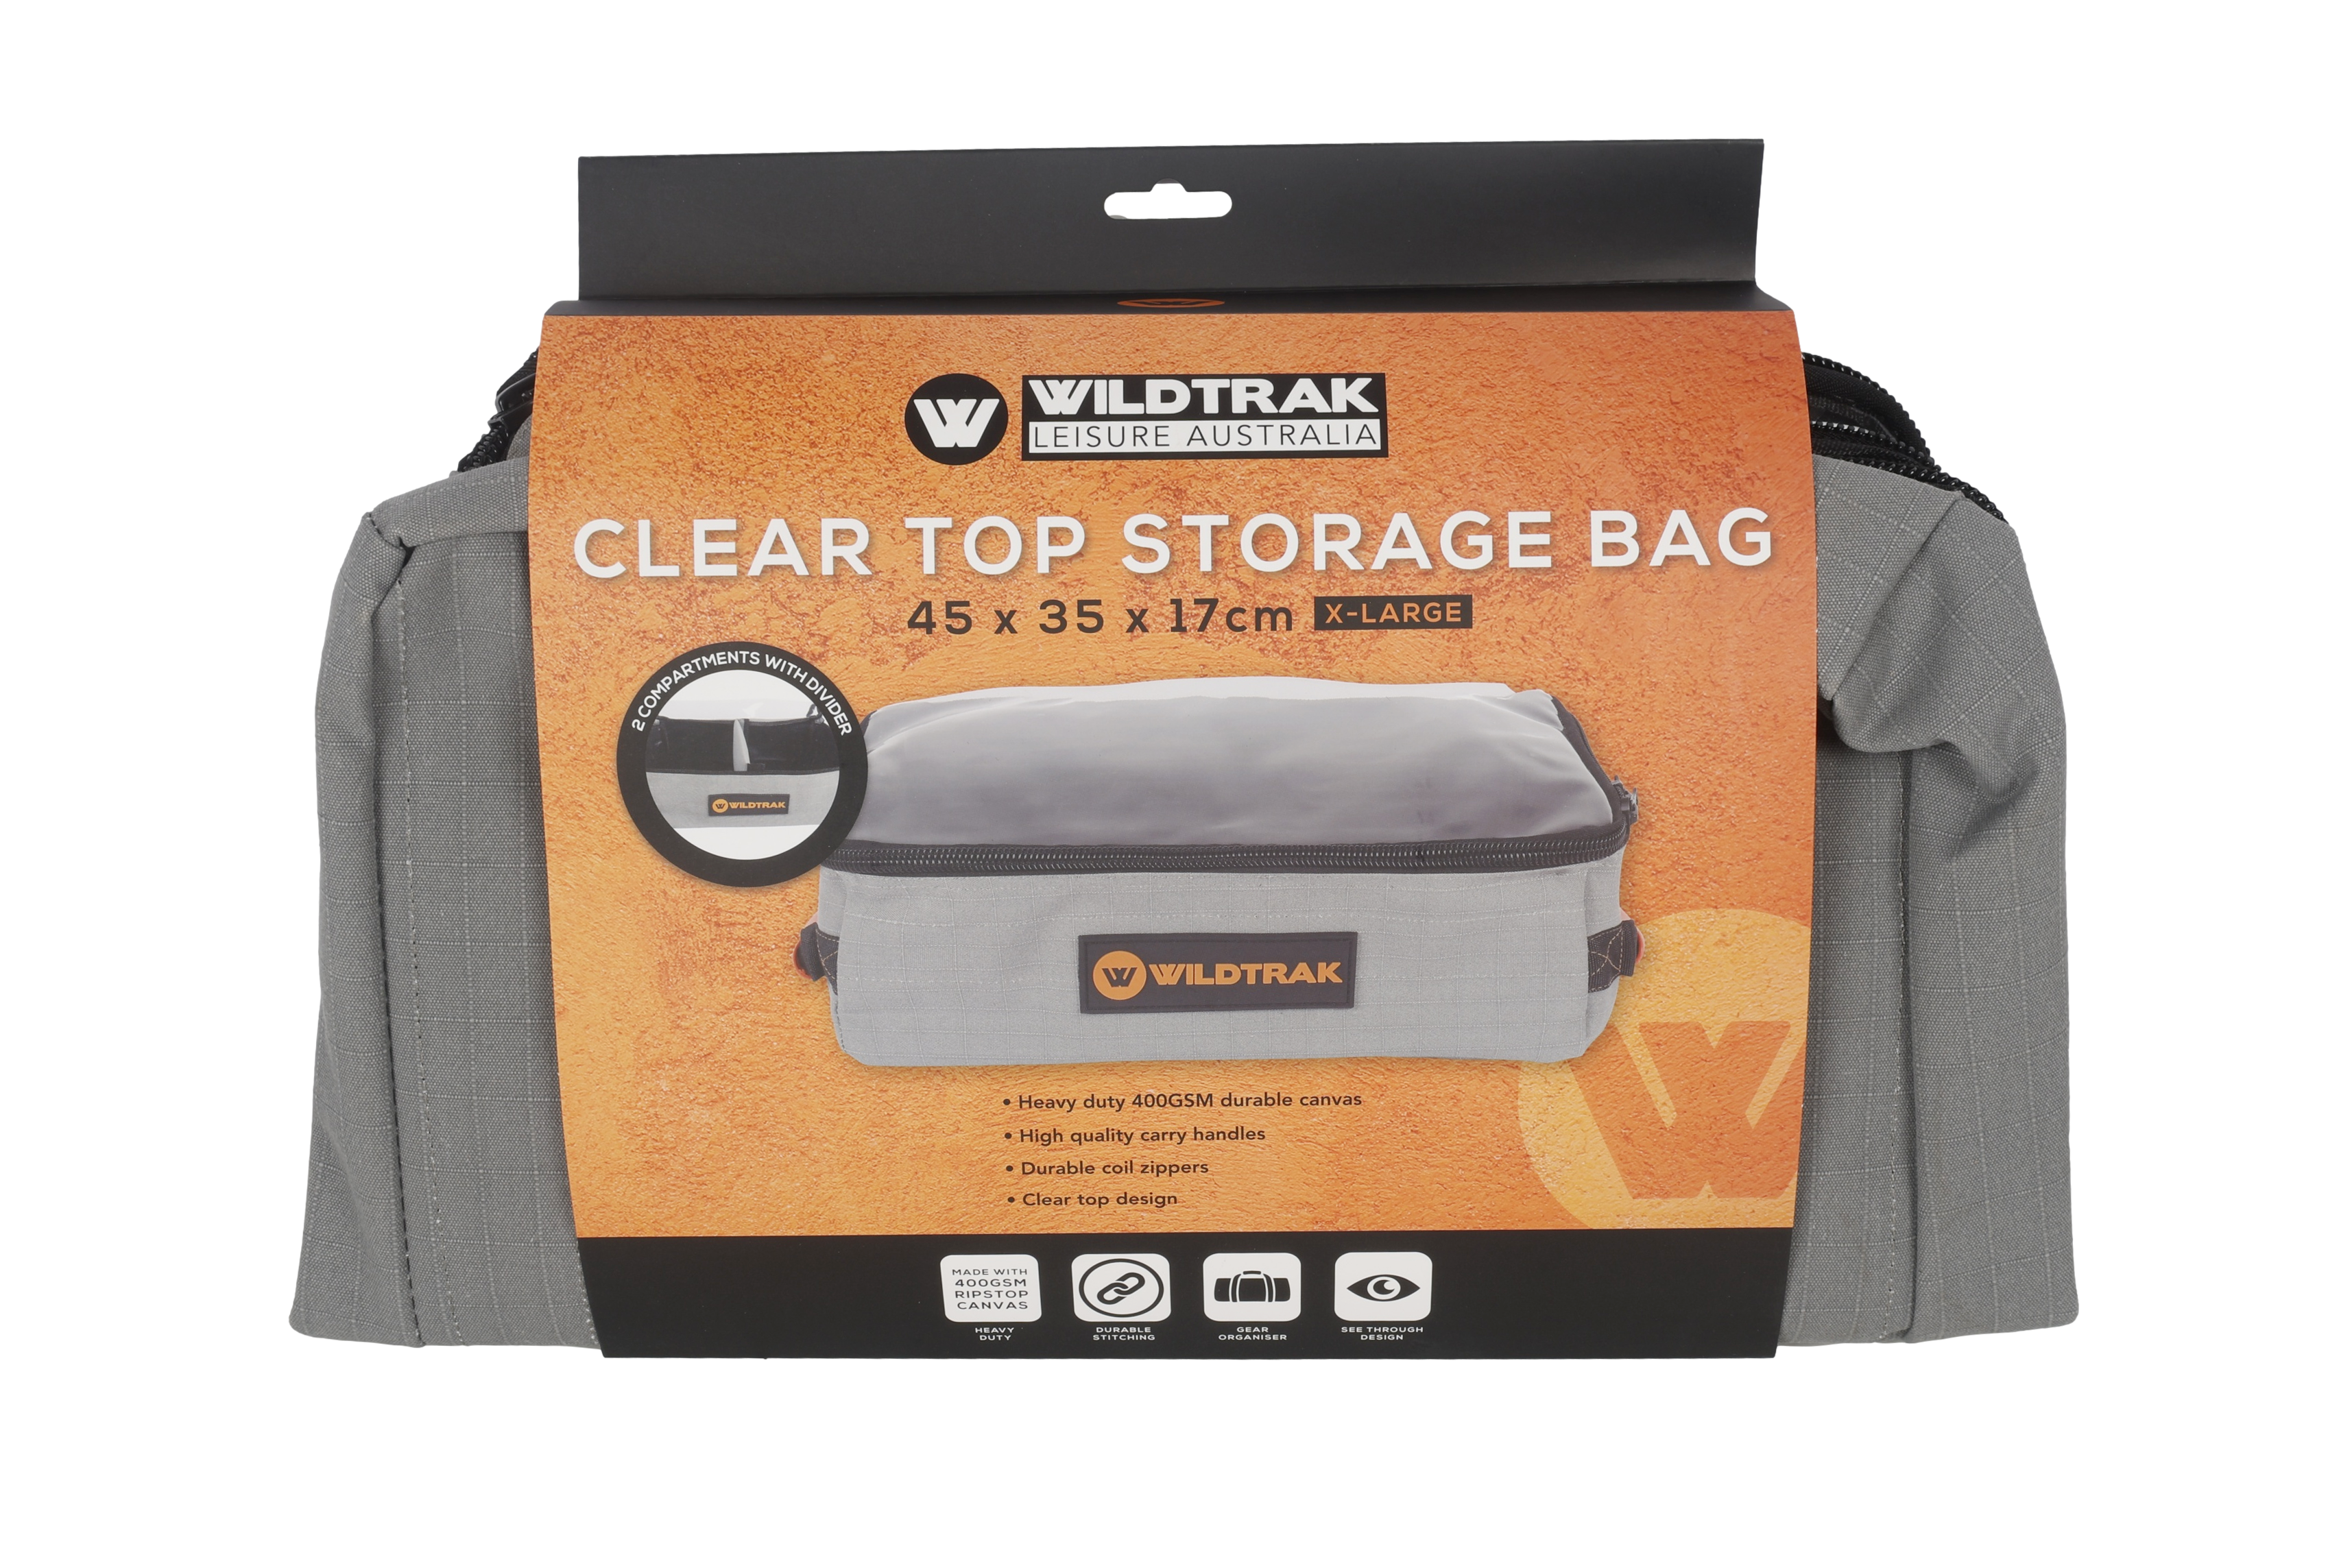 Wildtrak™ Extra Large Clear Top Storage Bag for Camping and 4WD Off-Roading - Heavy-Duty 400GSM Ripstop Canvas